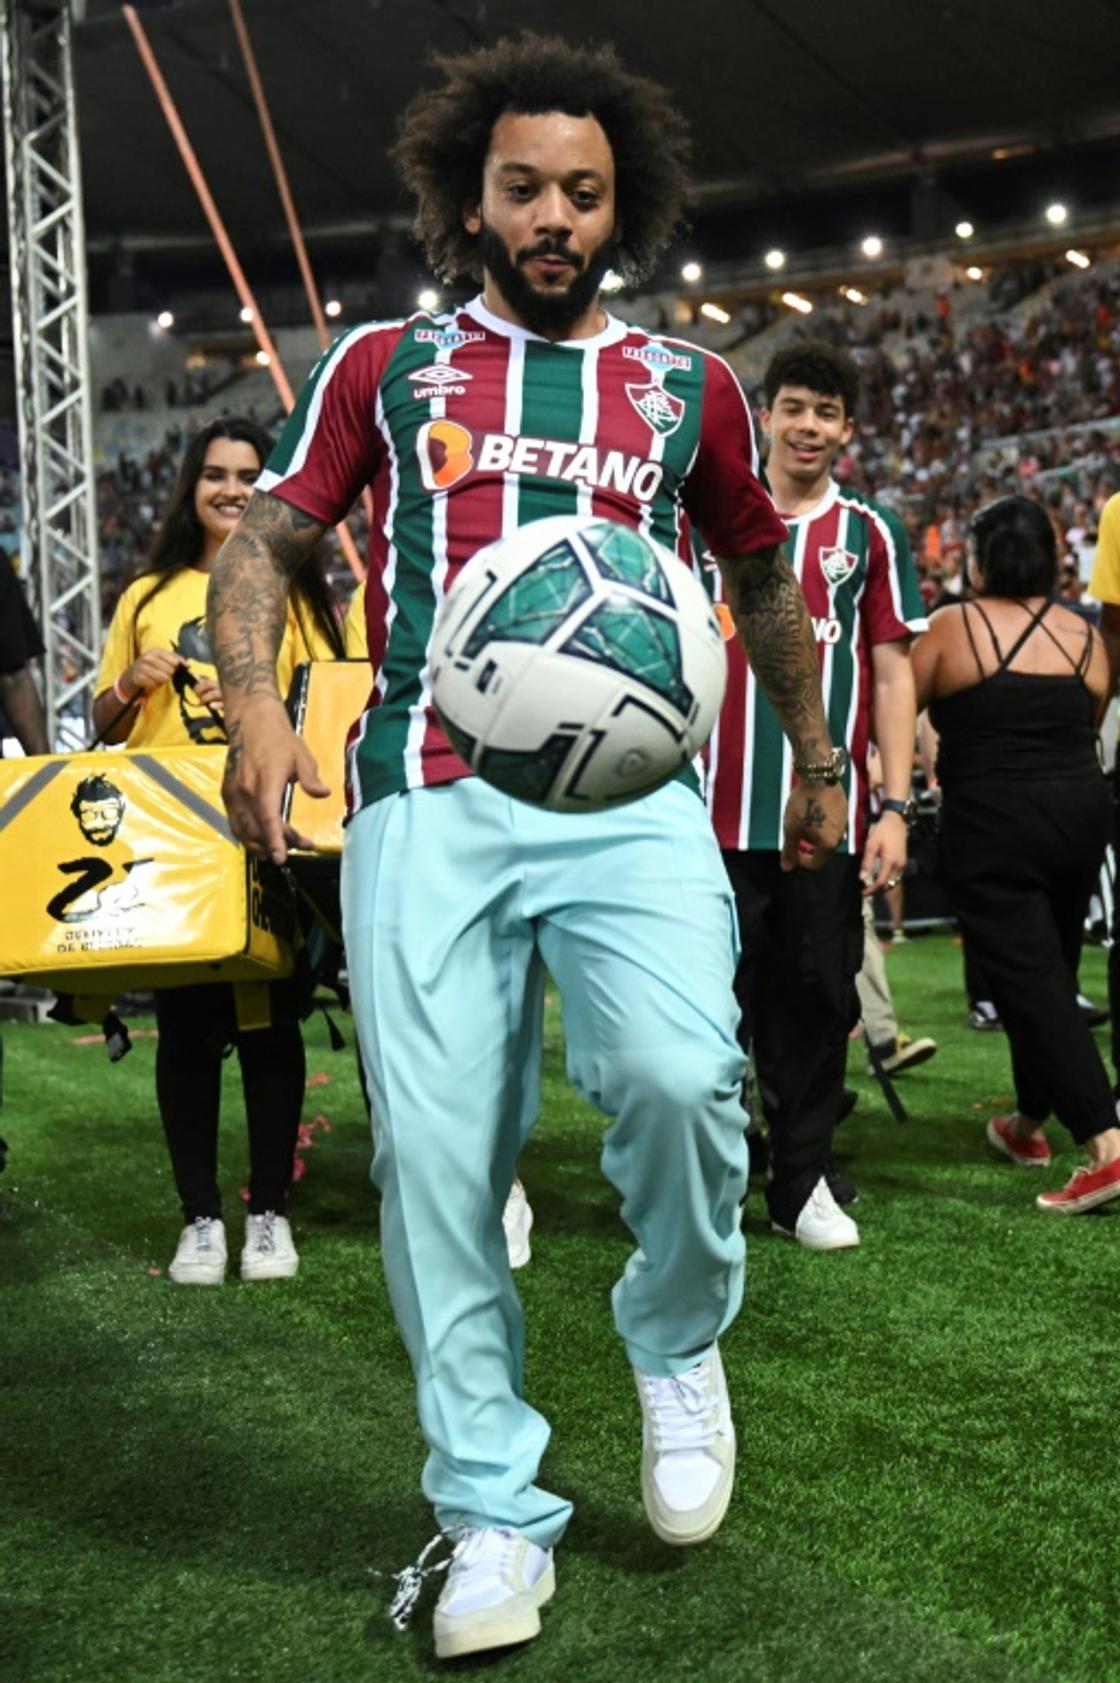 Brazilian left-back Marcelo returned to his homeland and Fluminense after years starring for Real Madrid